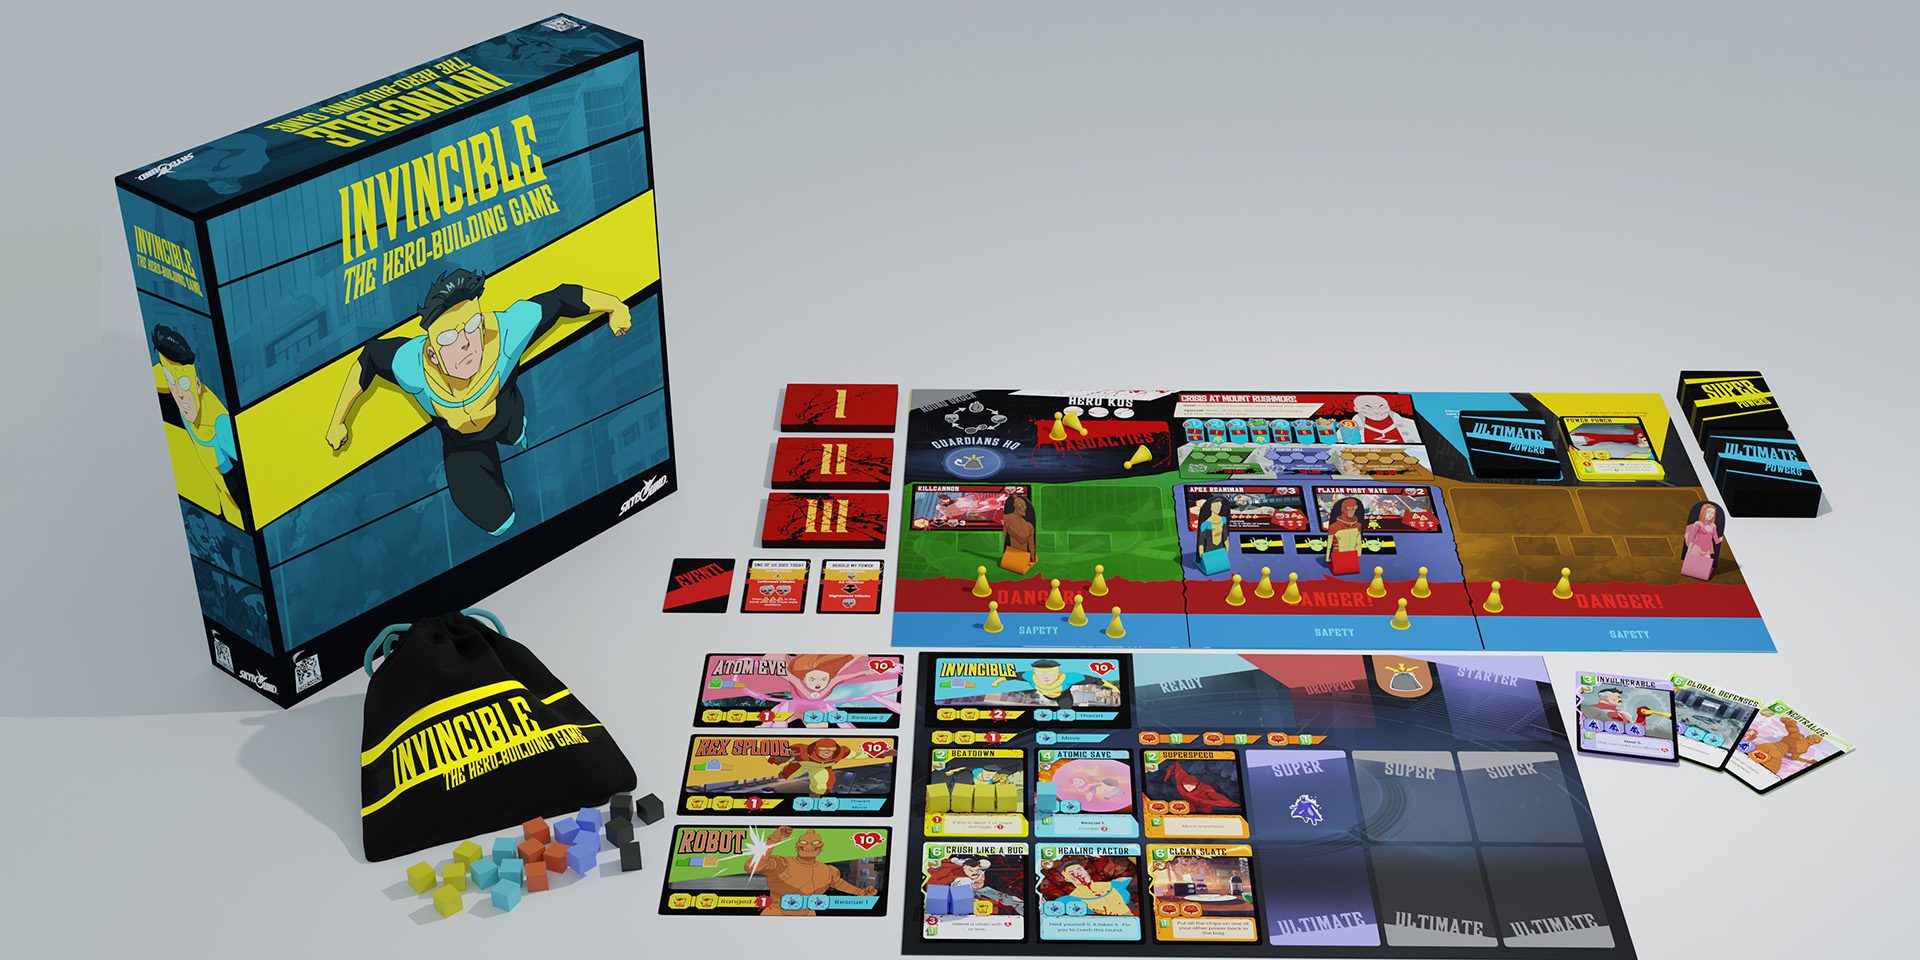 Invincible: The Hero-Building Game contents